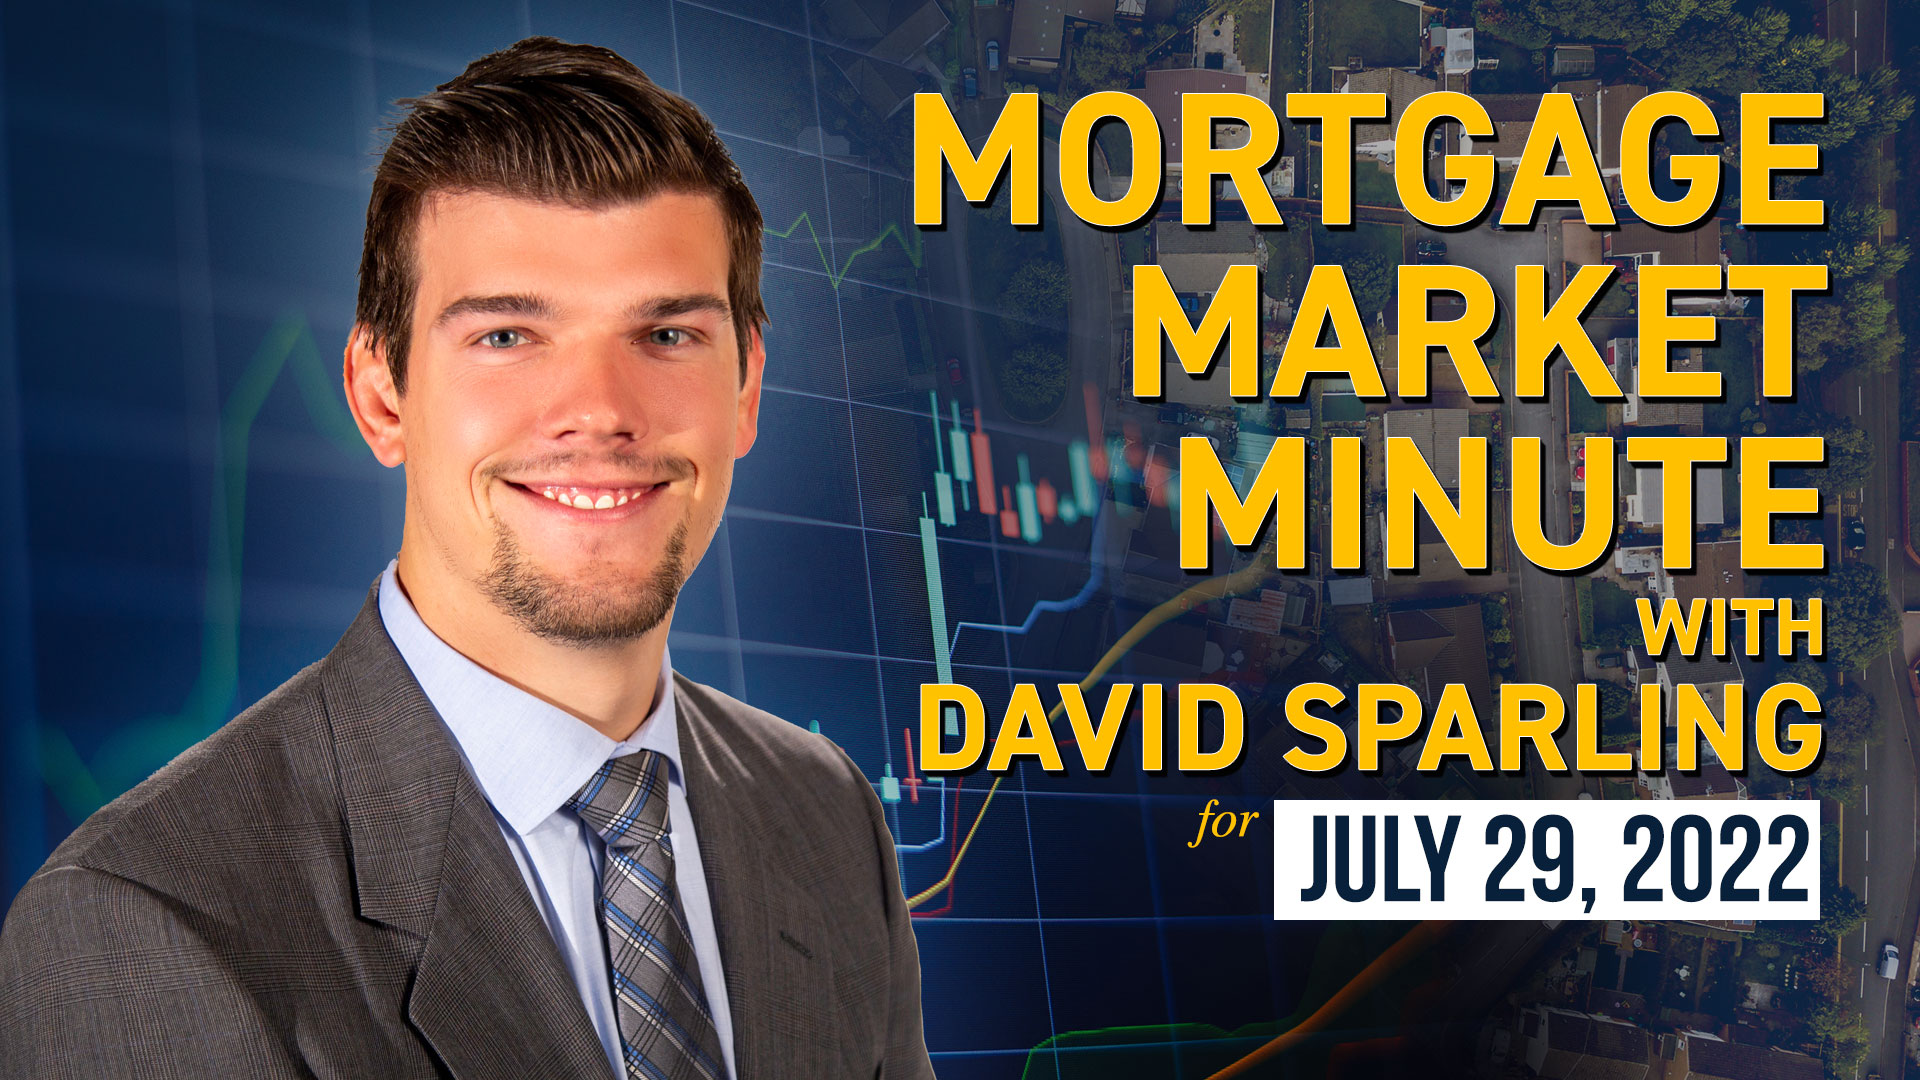 Image for Dave Sparling's Mortgage Market Minute